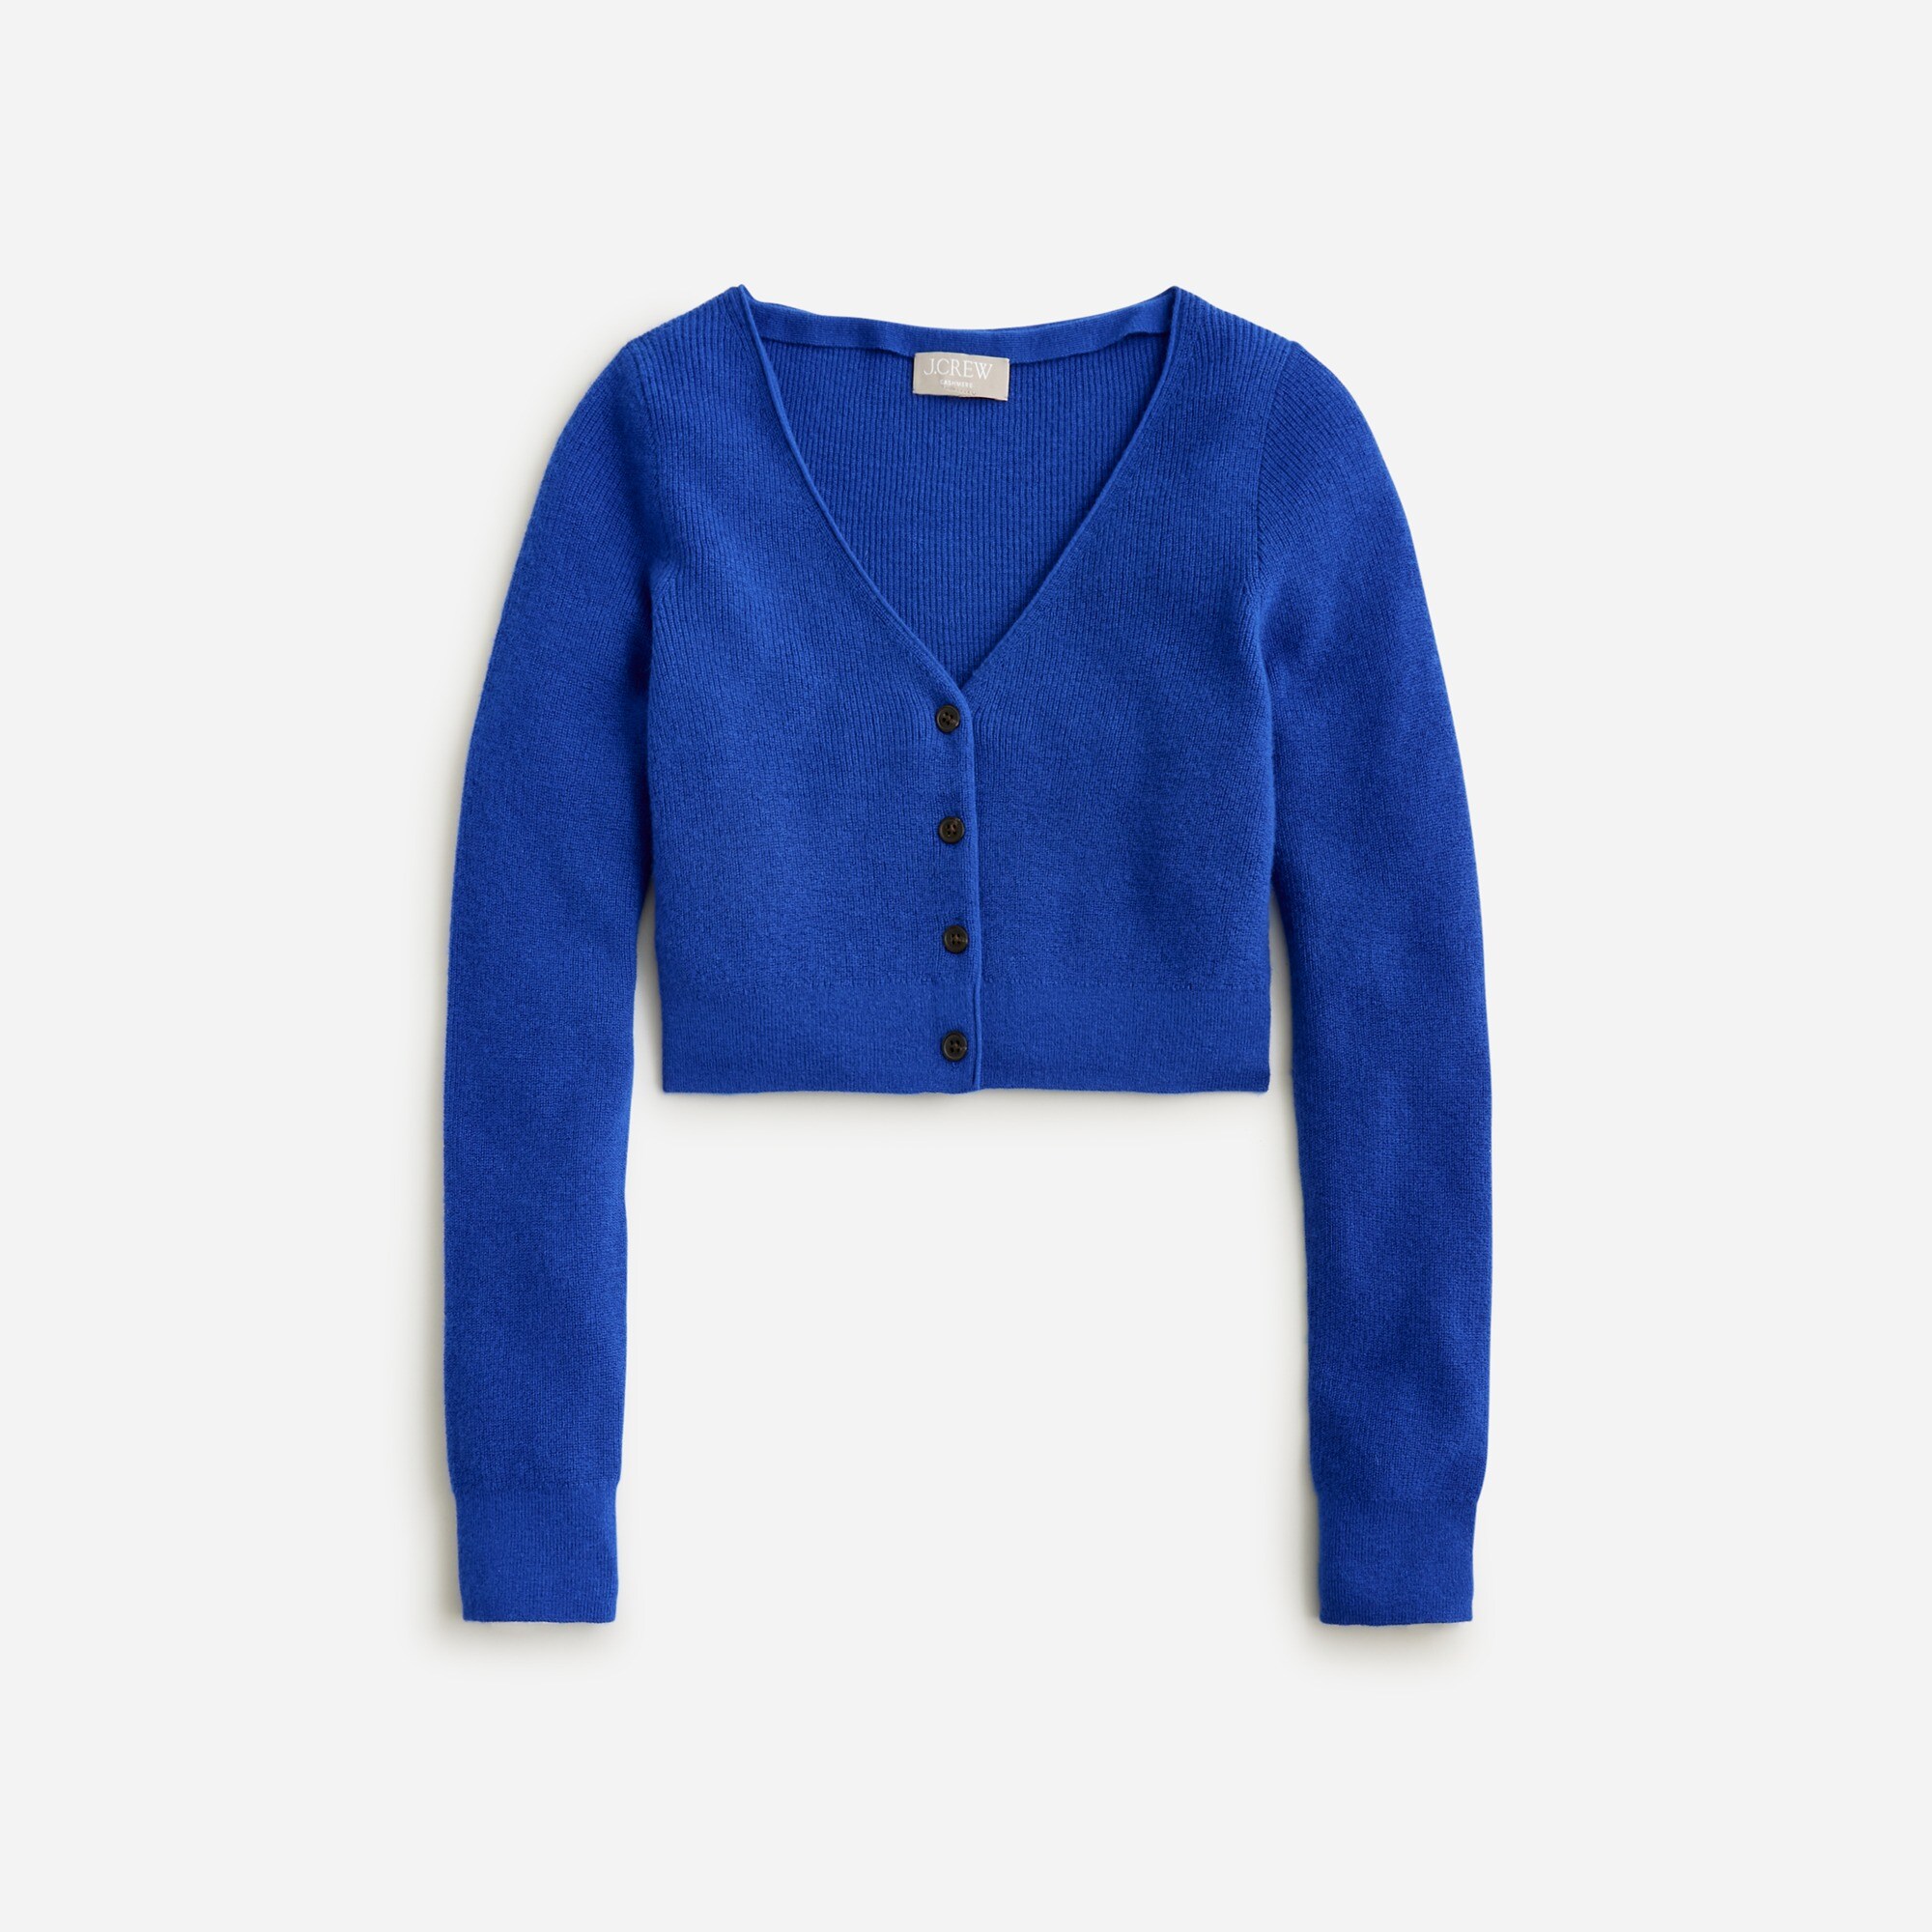  Featherweight cashmere cropped cardigan sweater